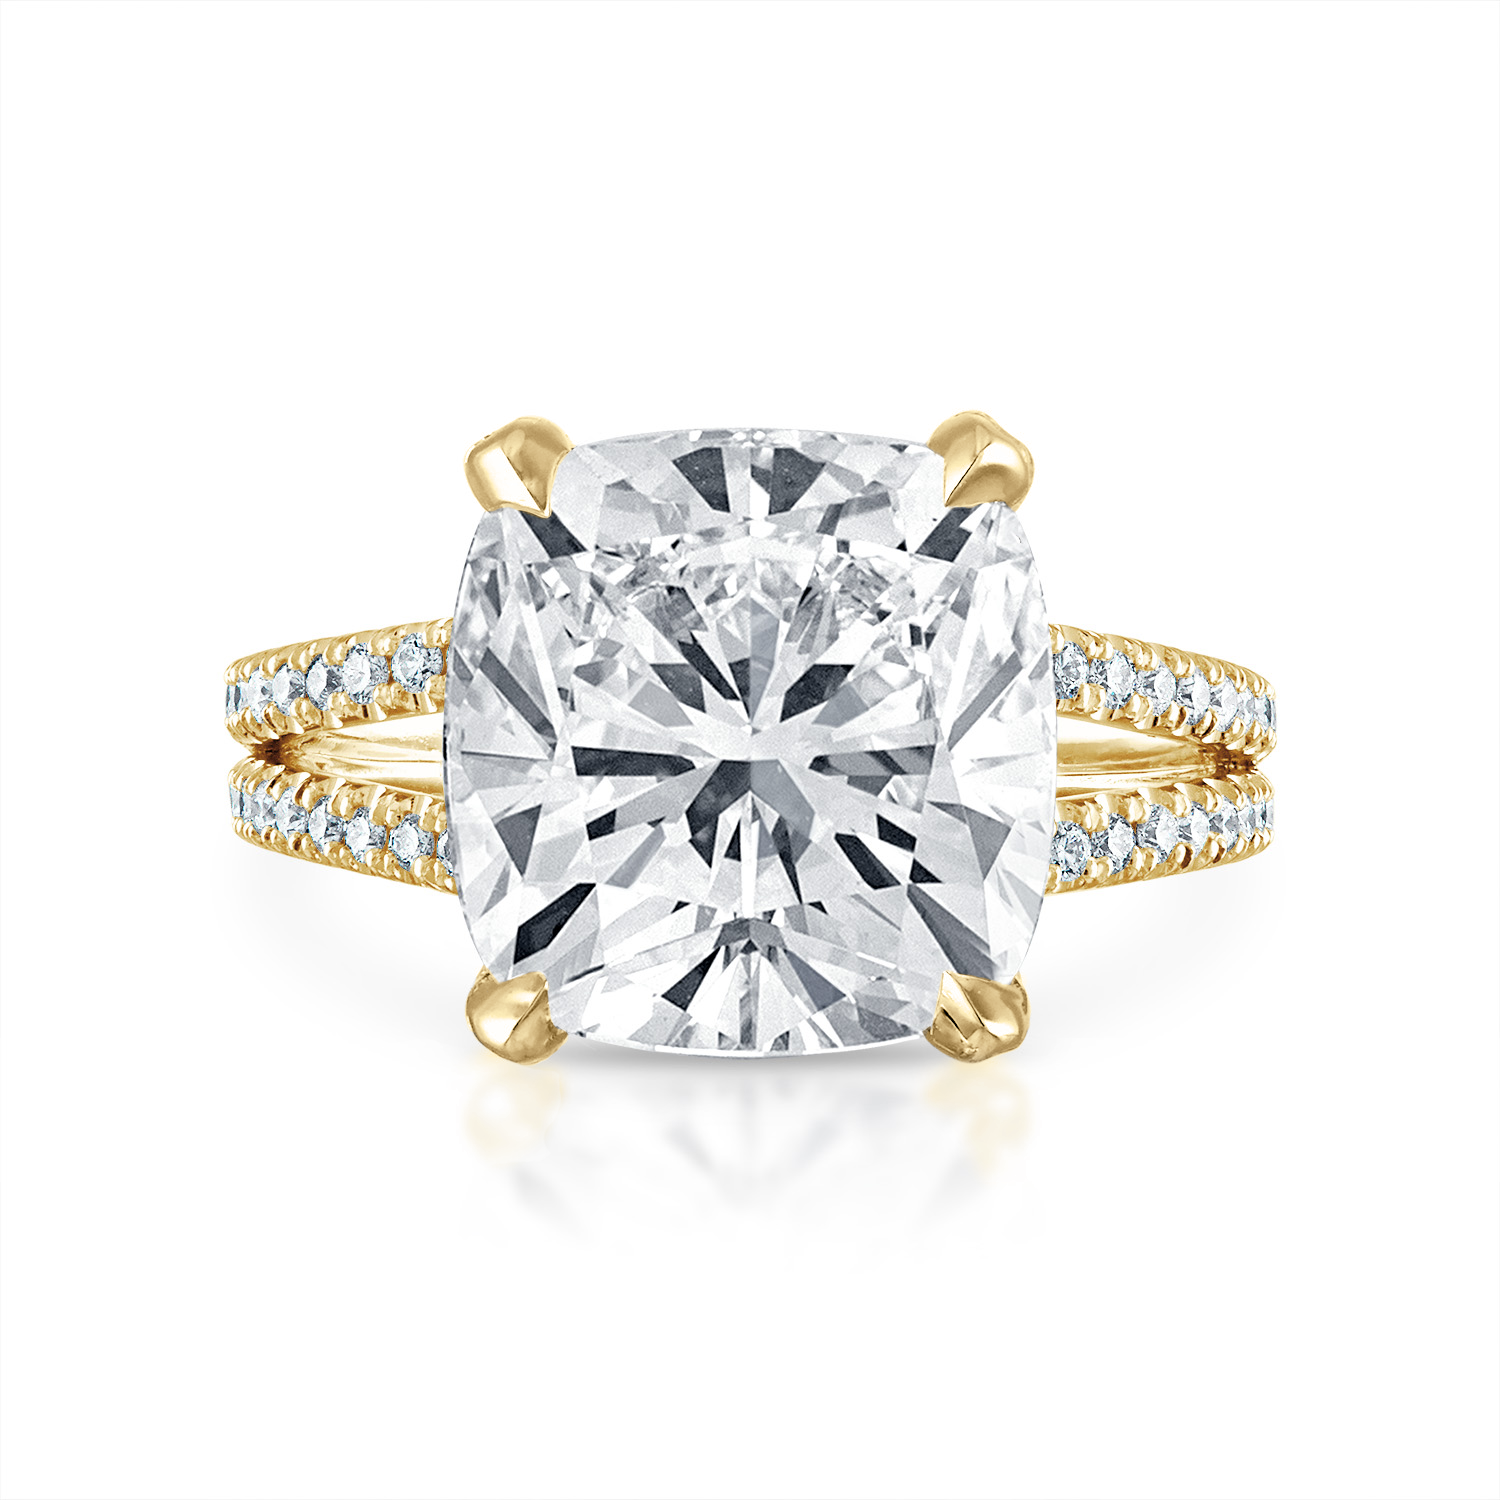 Cushion Pave Split Shank Engagement Ring in Yellow Gold